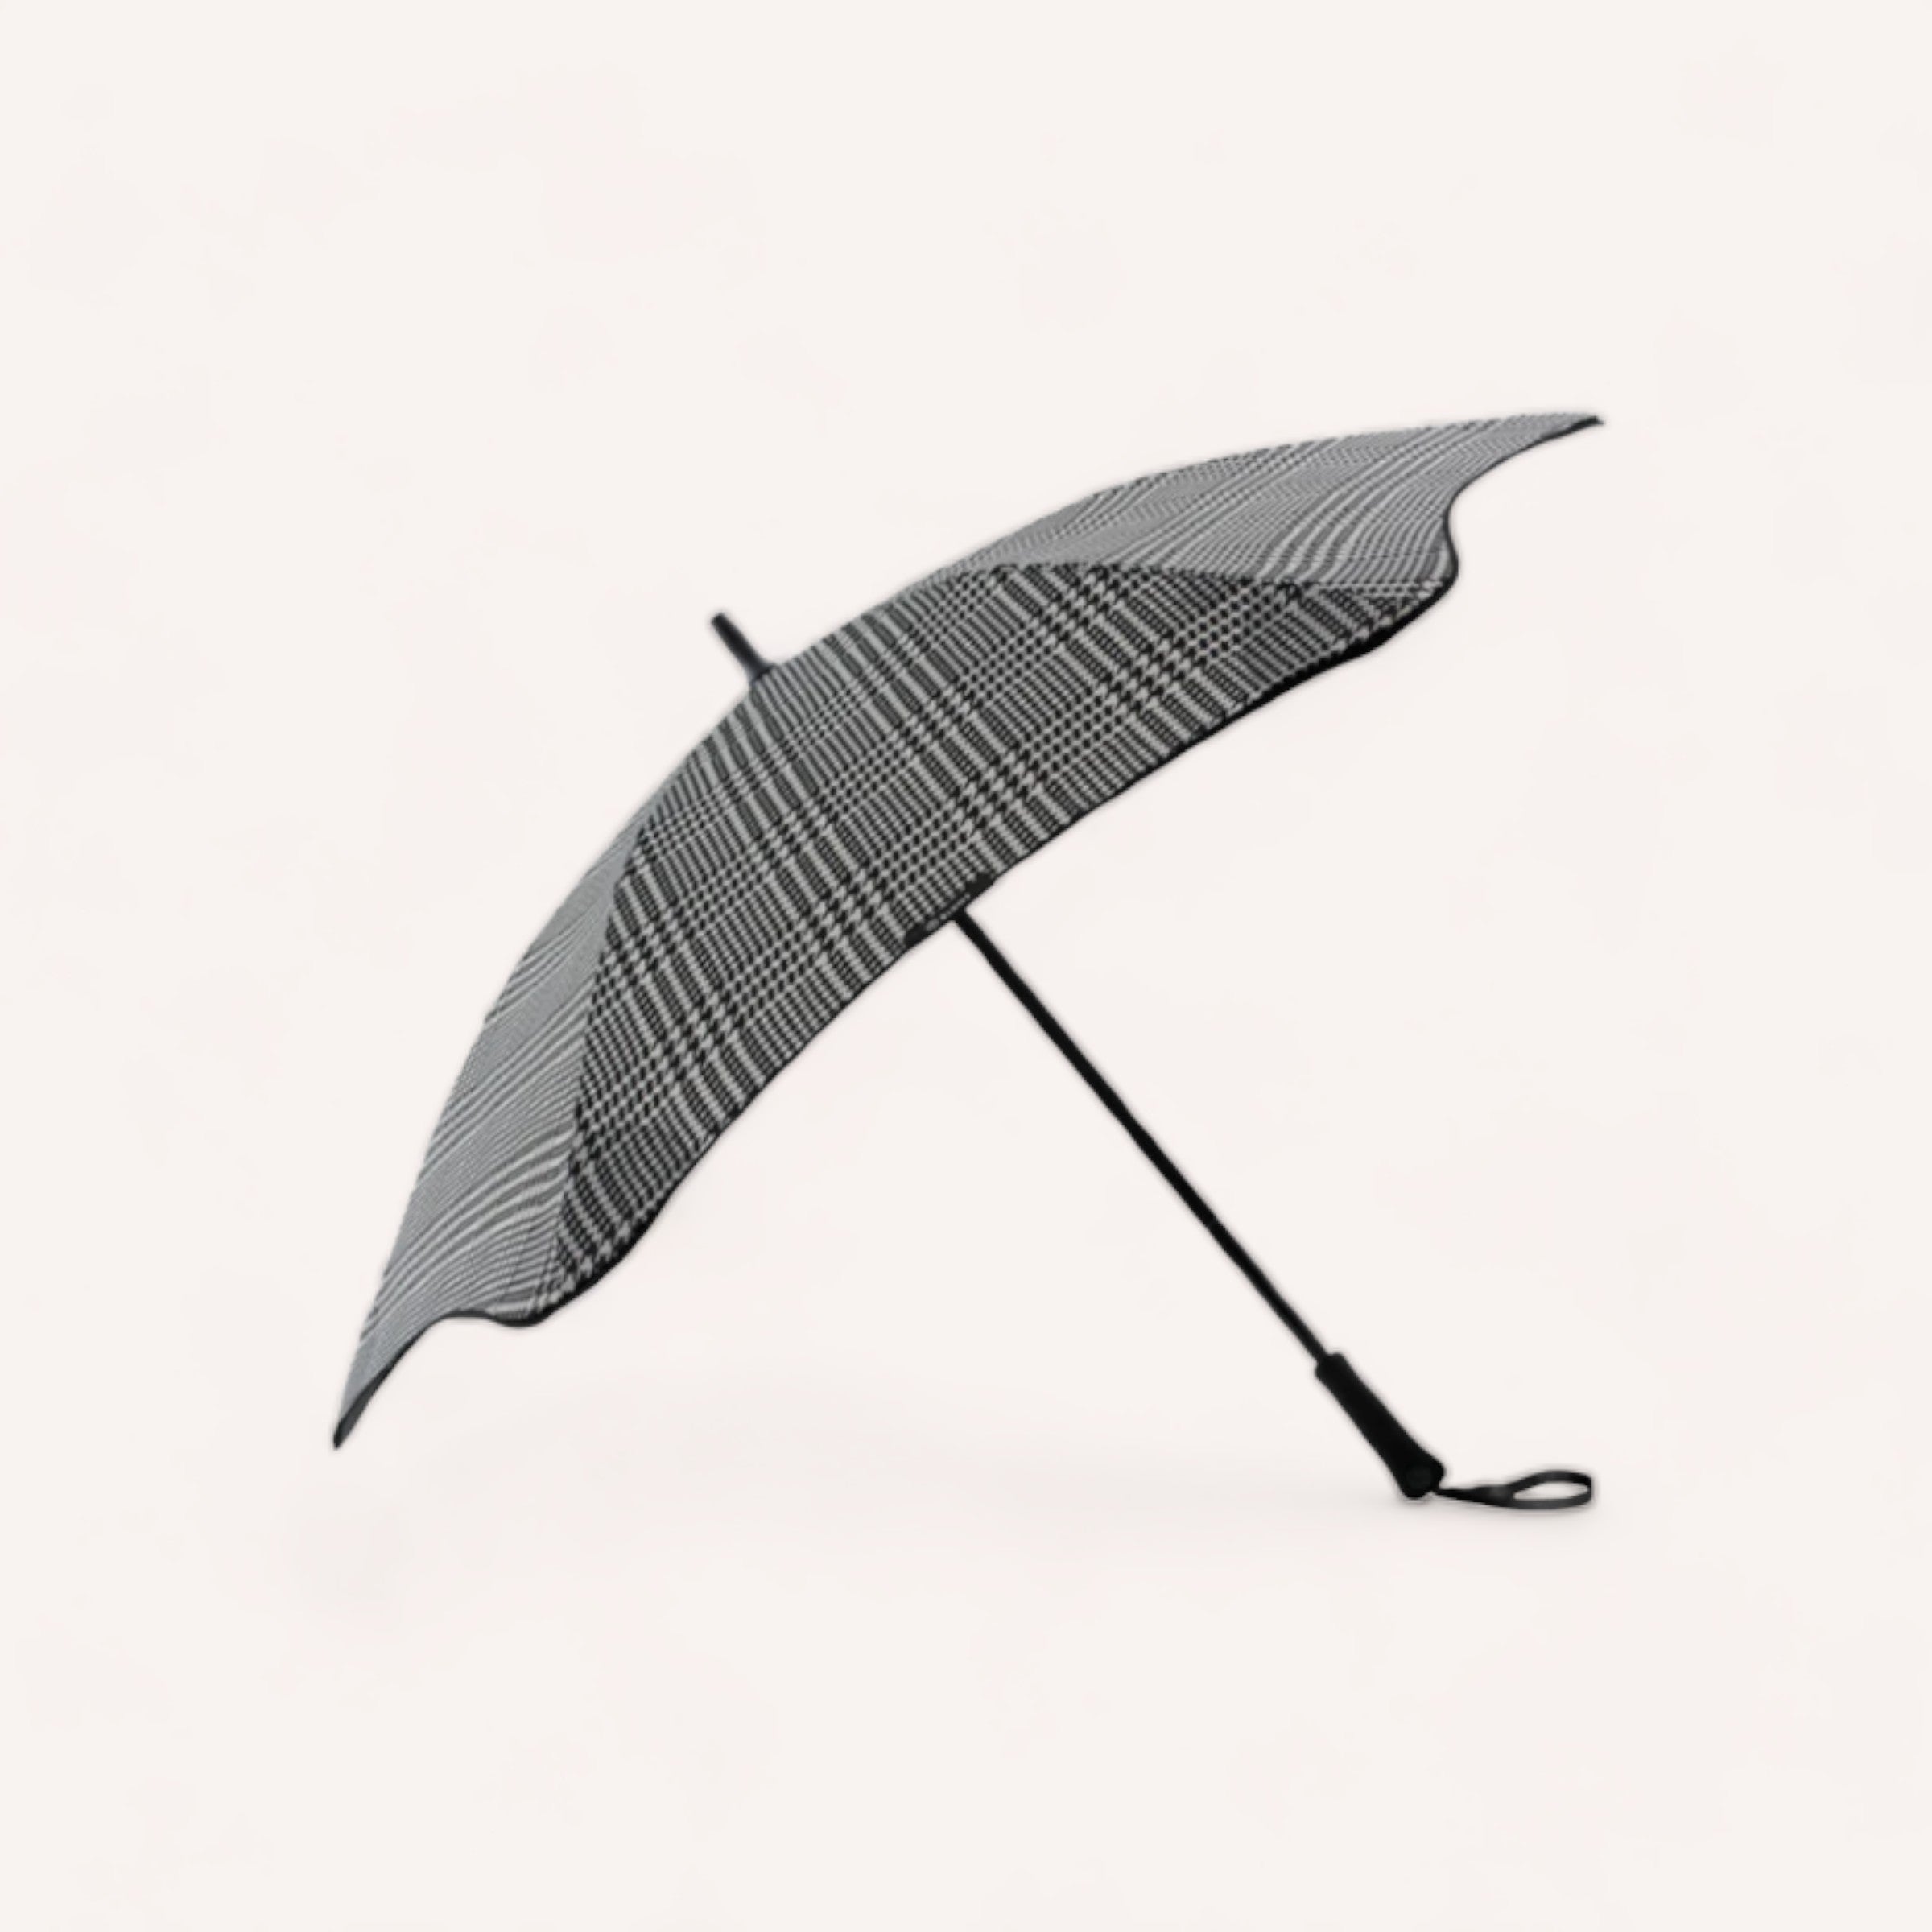 limited edition houndstooth umbrella by blunt